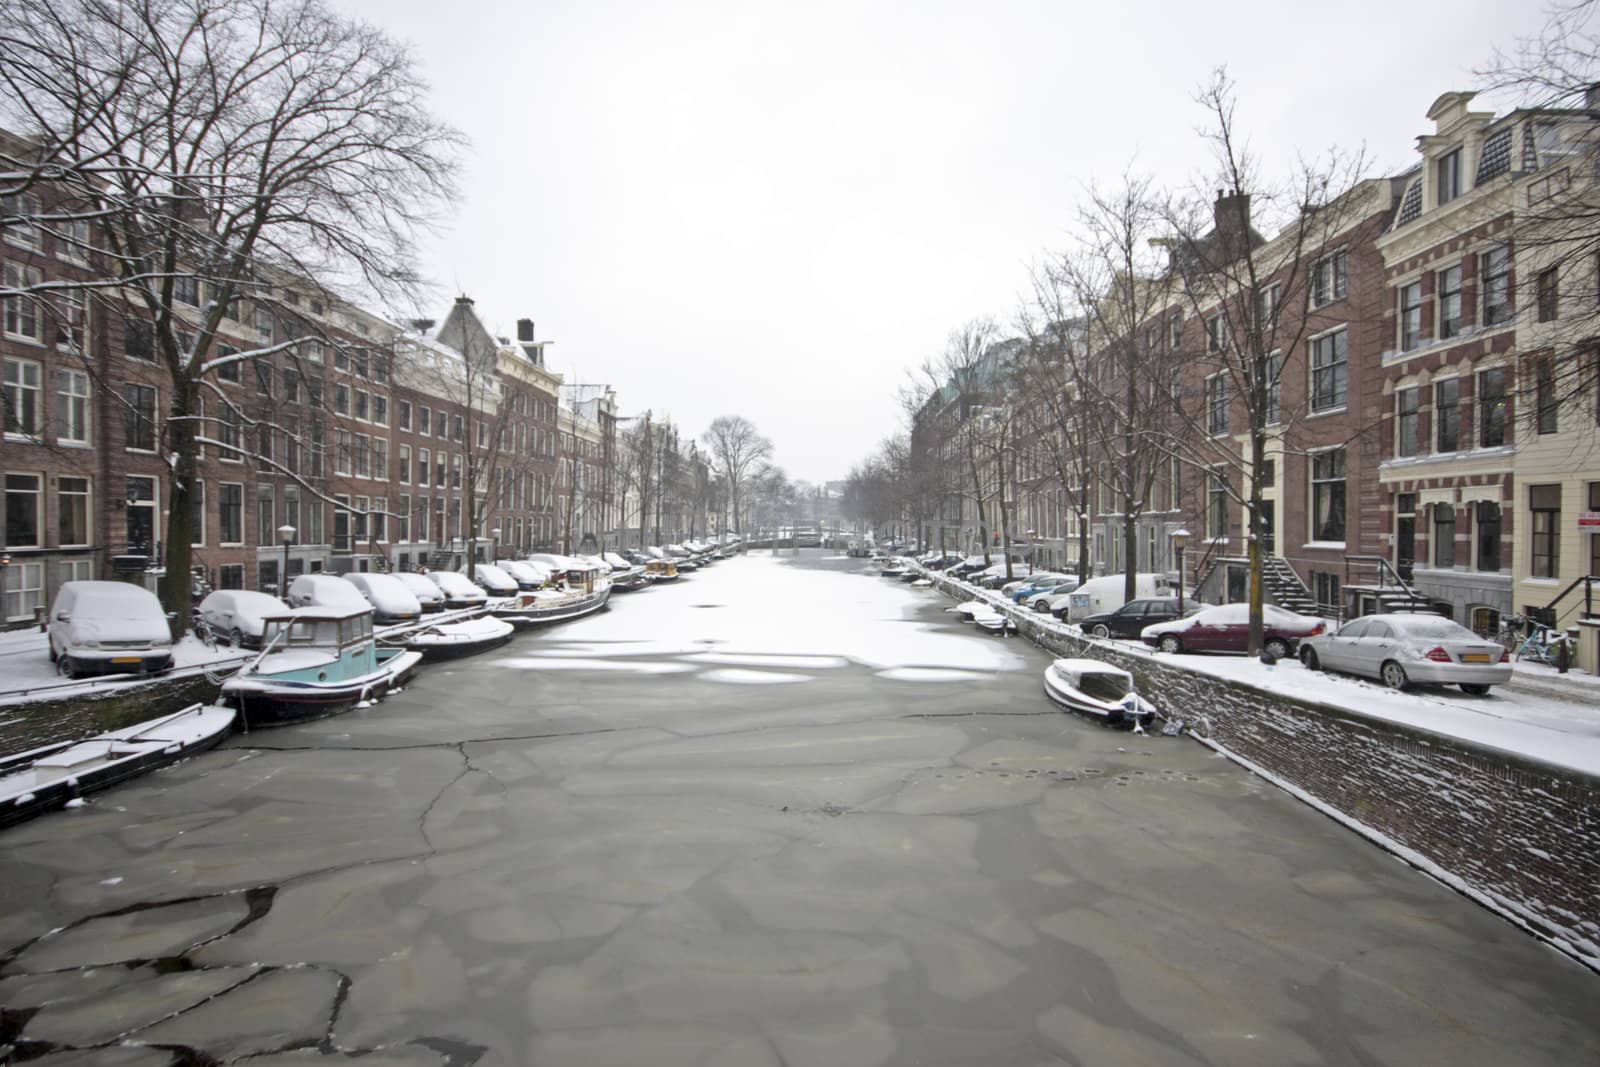 snowy Amsterdam in the Netherlands by devy